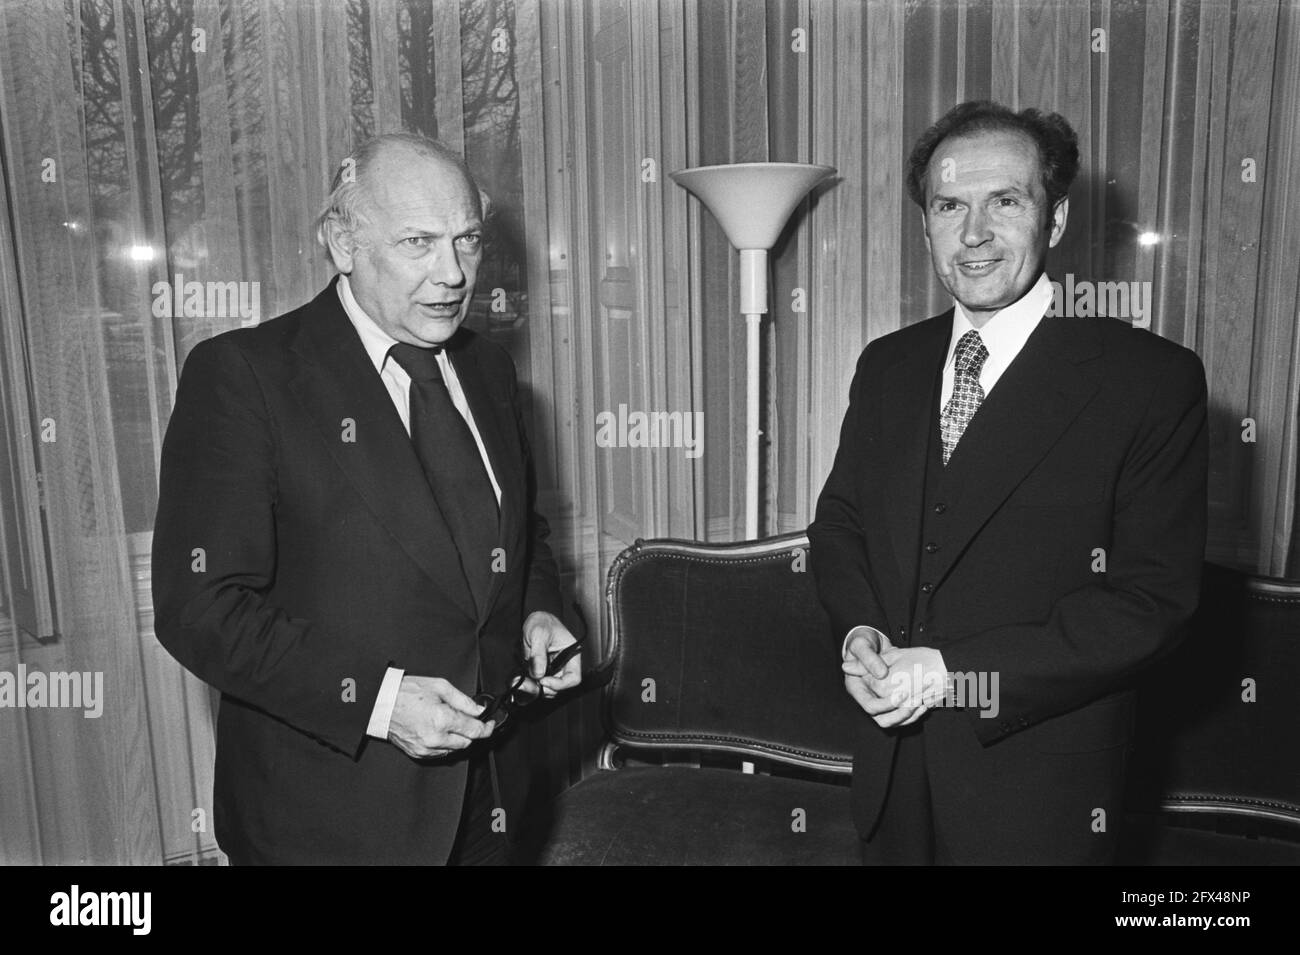 Prime Minister Den Uyl receives foreign minister of GDR, Oskar Fischer, January 24, 1977, ministers, The Netherlands, 20th century press agency photo, news to remember, documentary, historic photography 1945-1990, visual stories, human history of the Twentieth Century, capturing moments in time Stock Photo